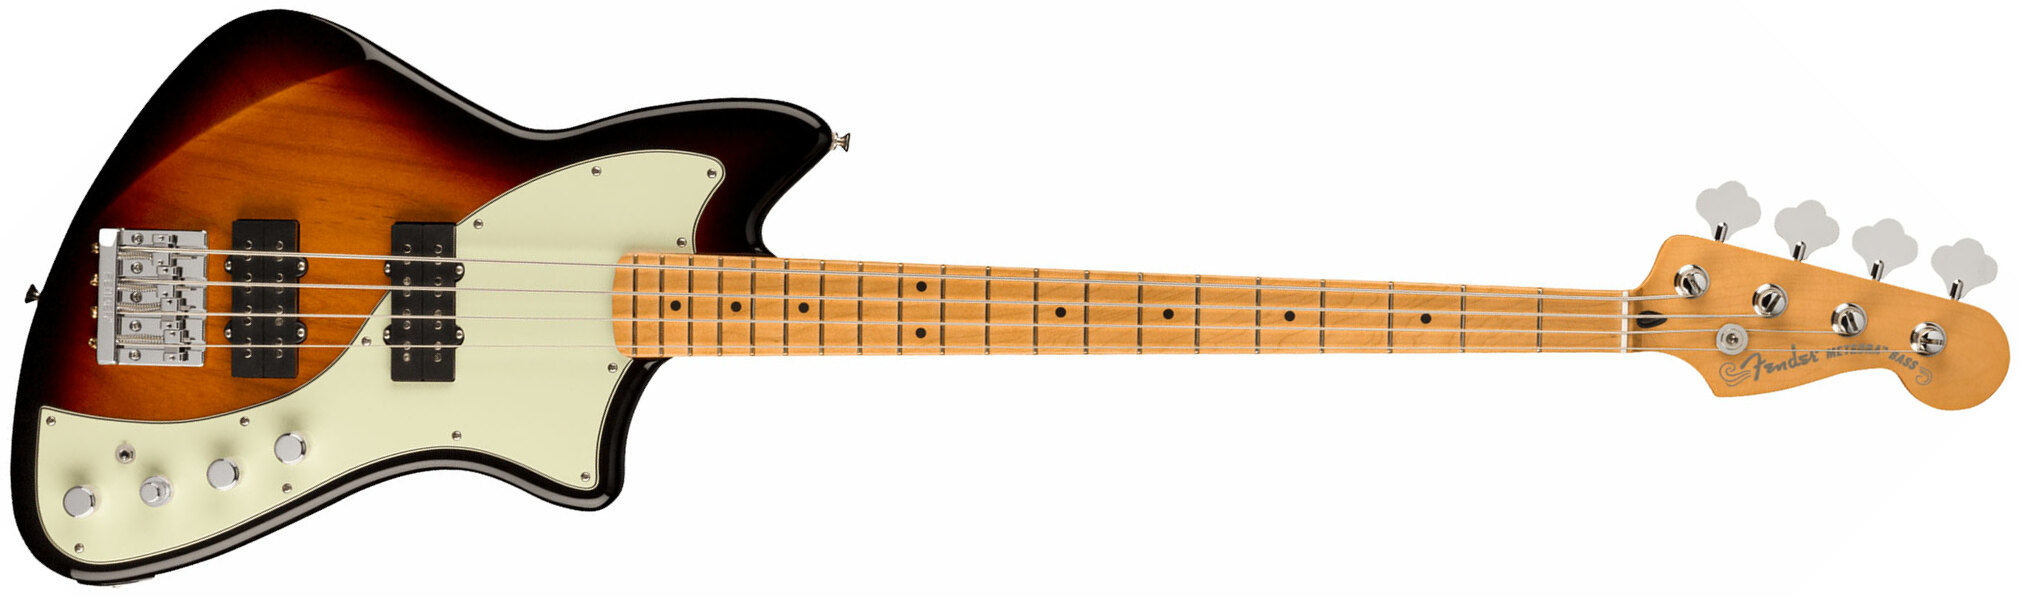 Fender Meteora Bass Active Player Plus Mex Mn - 3-color Sunburst - Solid body electric bass - Main picture